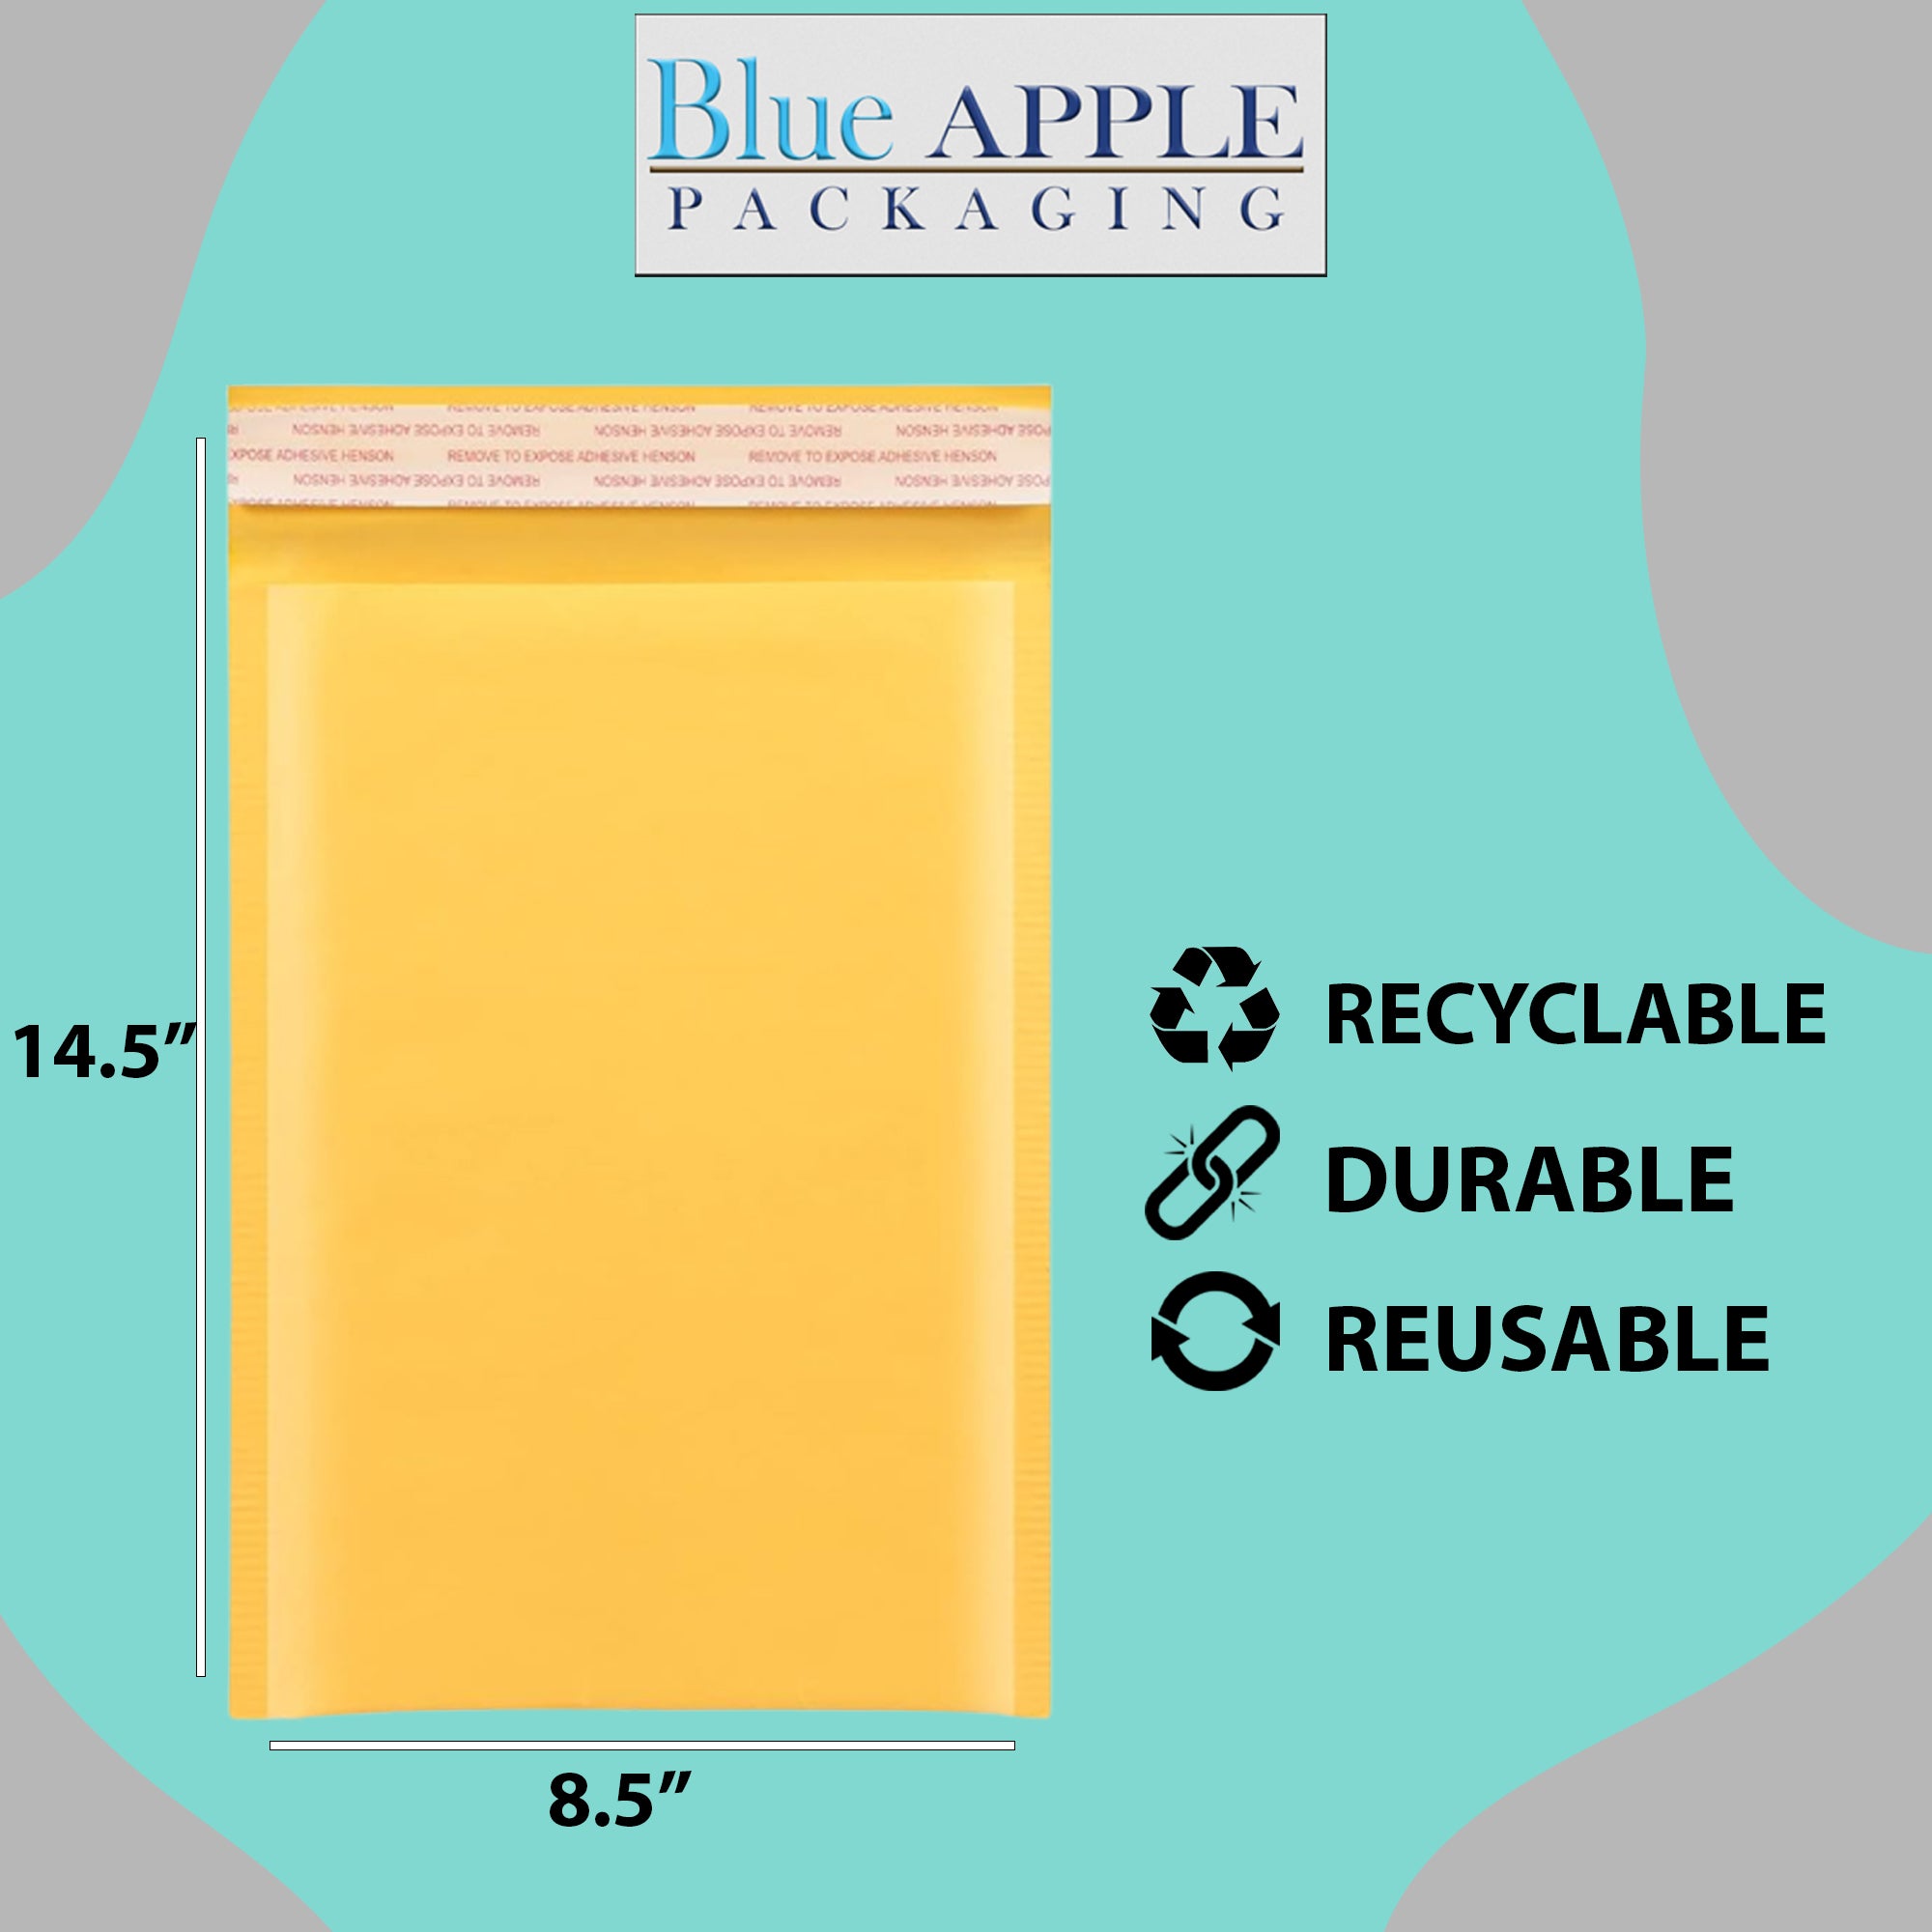 Kraft Bubble Mailer 8.5 X 14.5 inches - #3 Pack Of 100 Envelopes